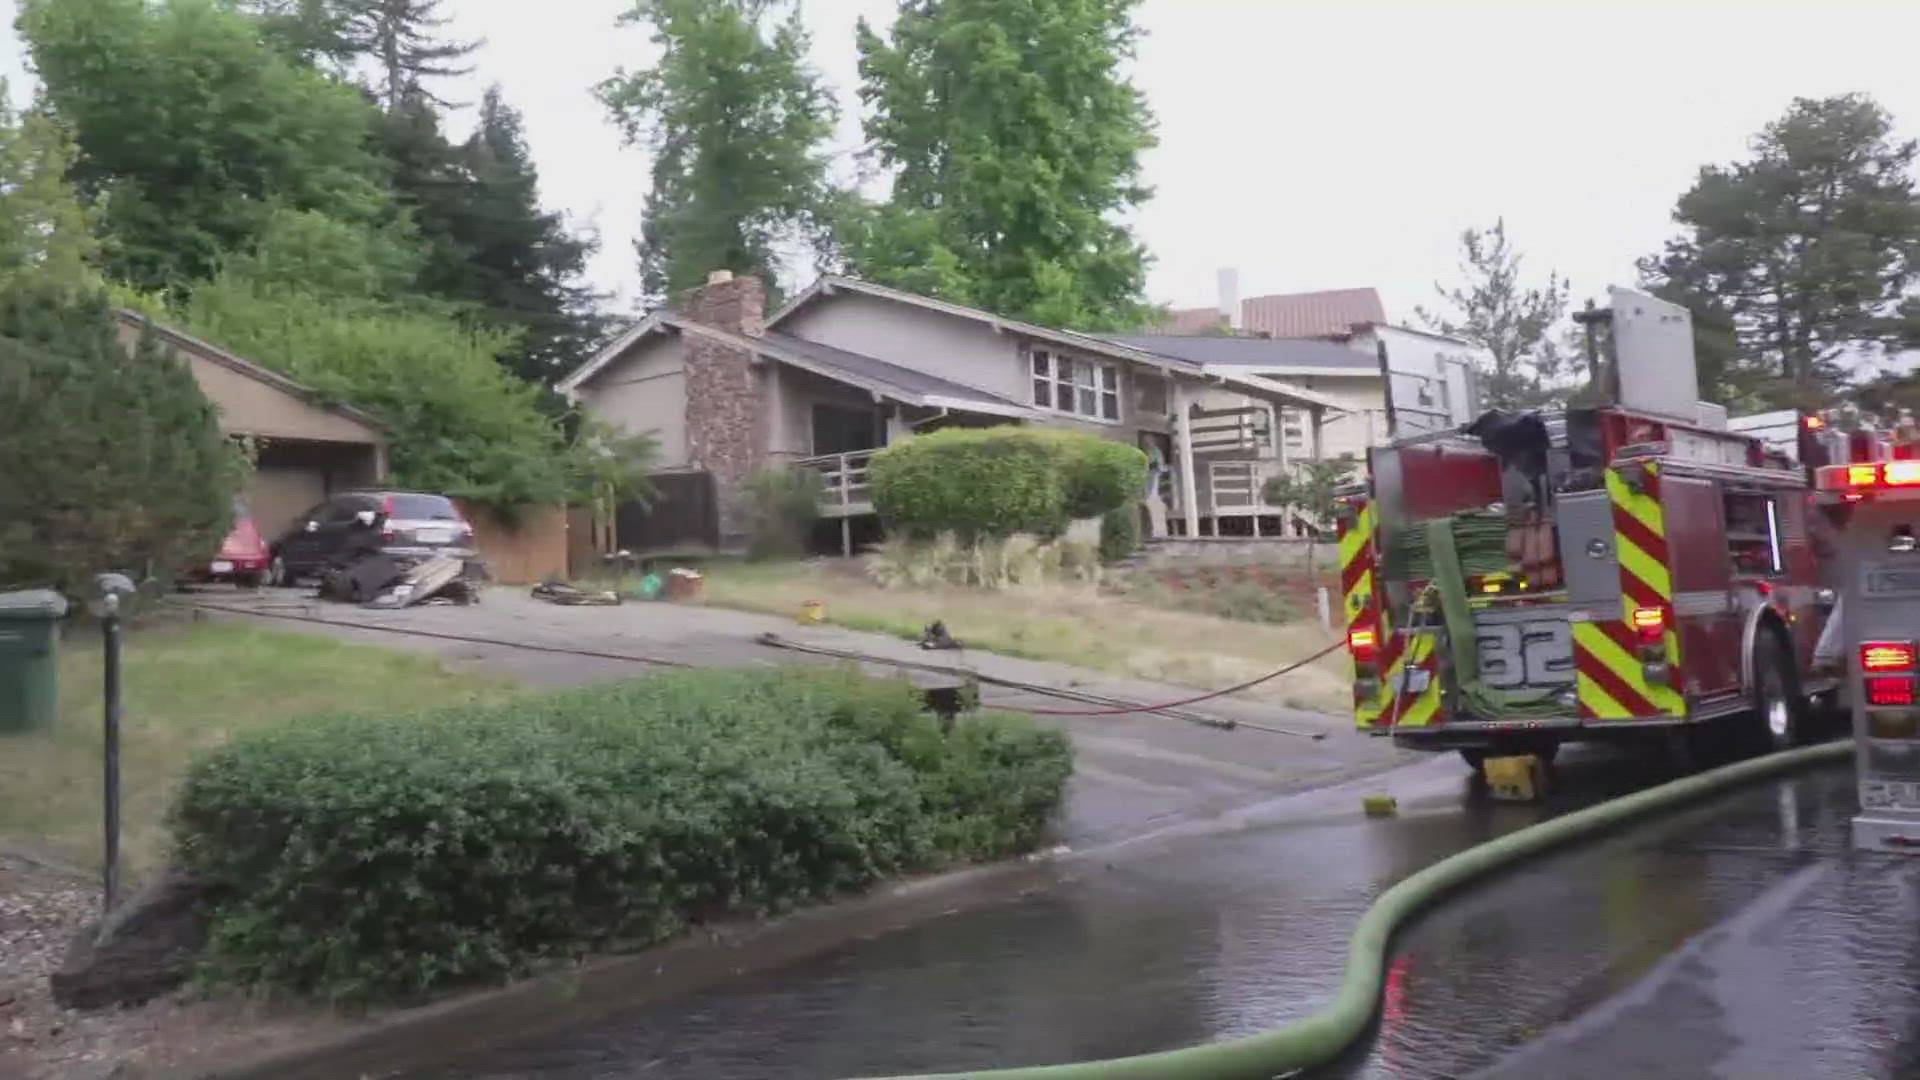 Firefighters described the home as having "hoarder conditions."